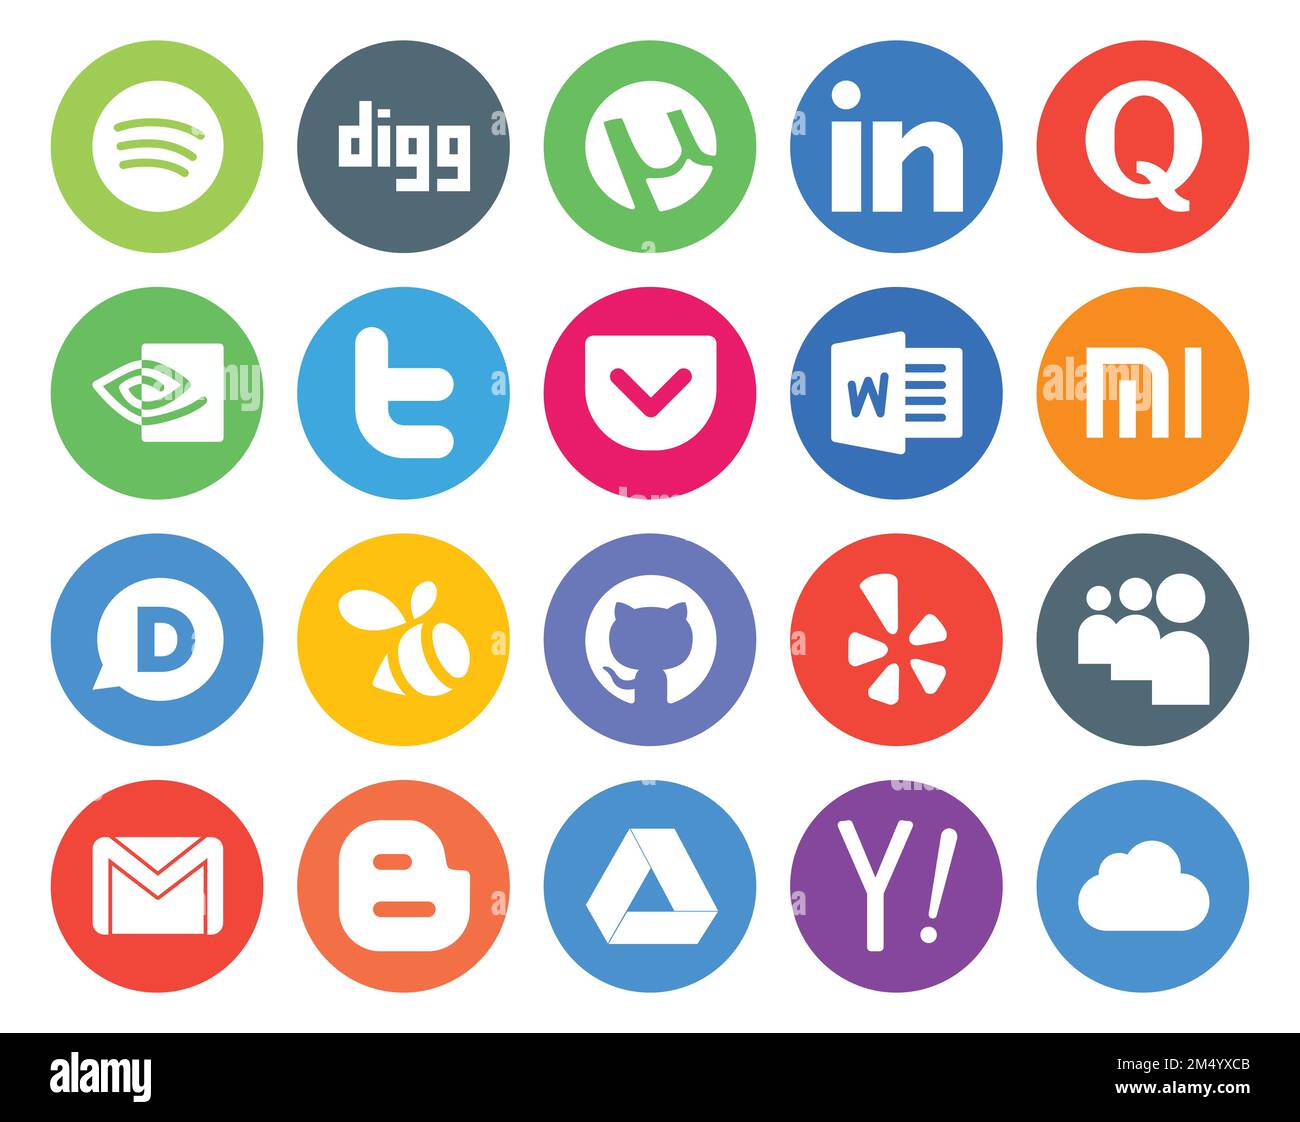 20 Social Media Icon Pack Including gmail. yelp. tweet. github. disqus Stock Vector